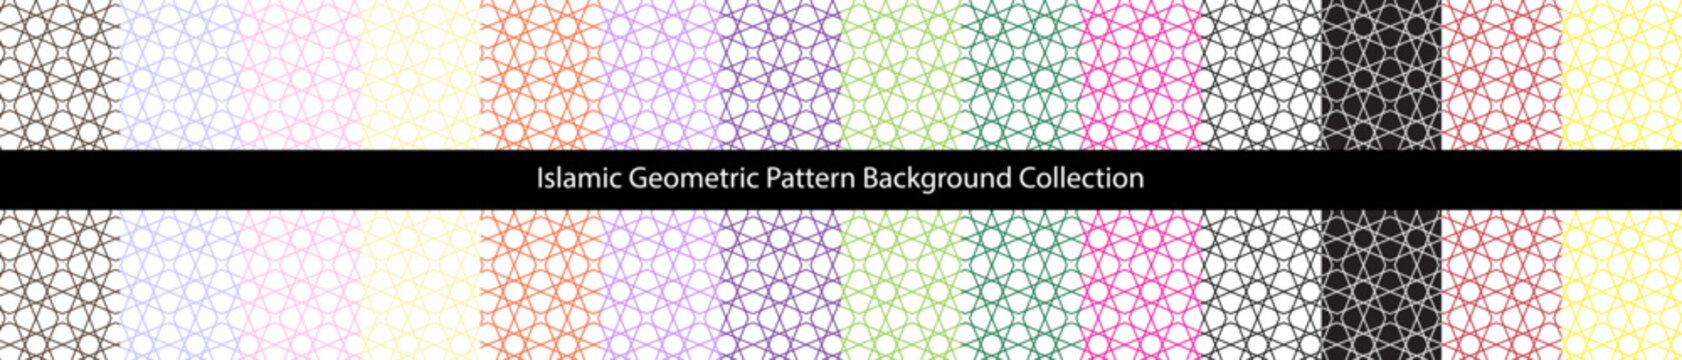 Islamic Geometric Pattern Background Collection, with same design, different color